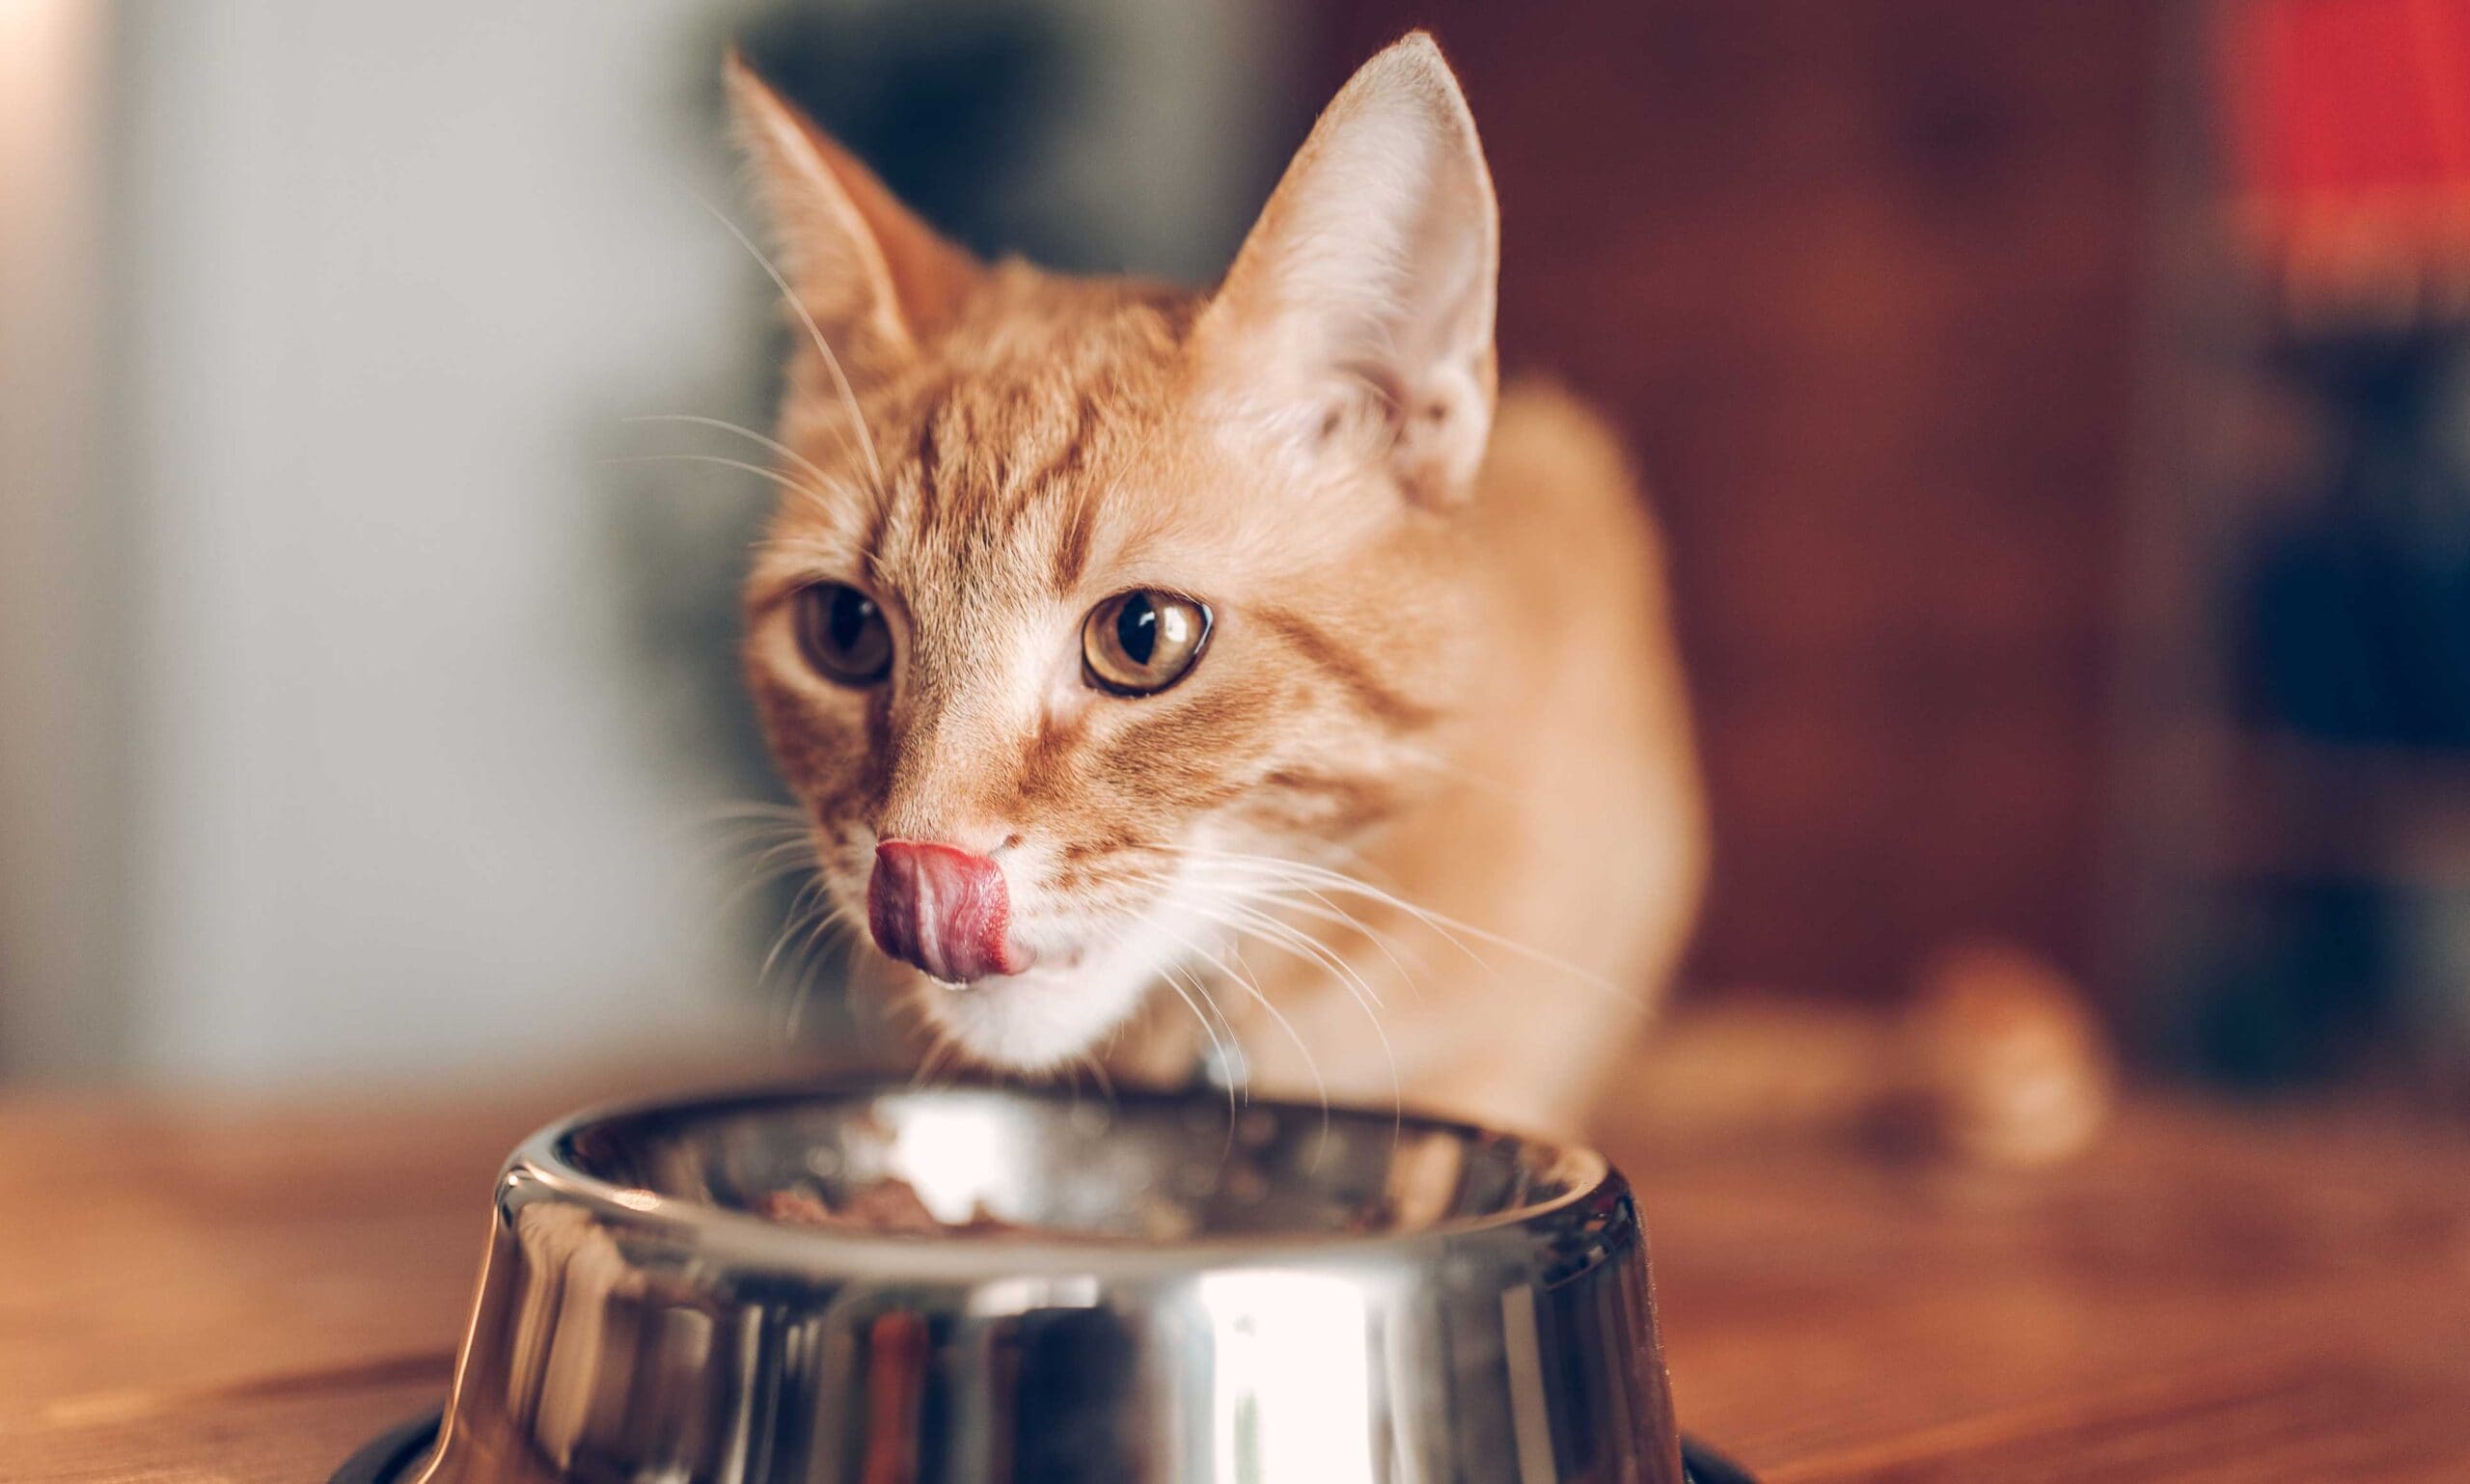 cat food for all ages: adult cat eating food